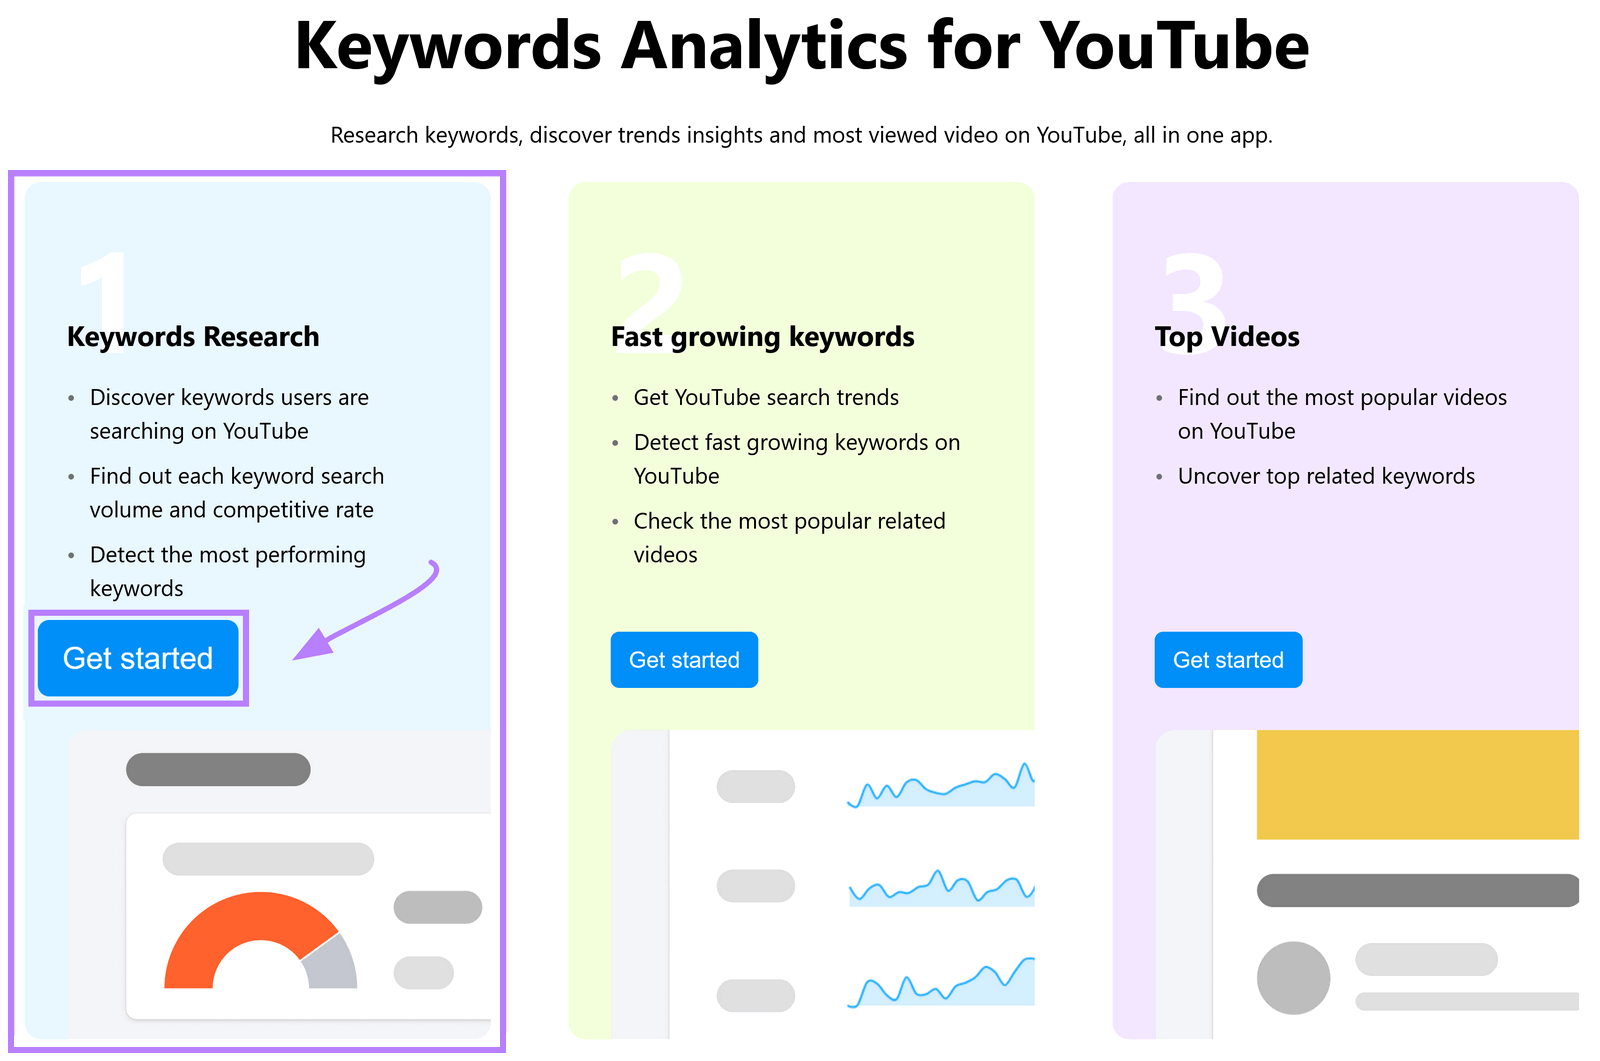 Keyword Analytics for YouTube home with the "Get Started" button highlighted.